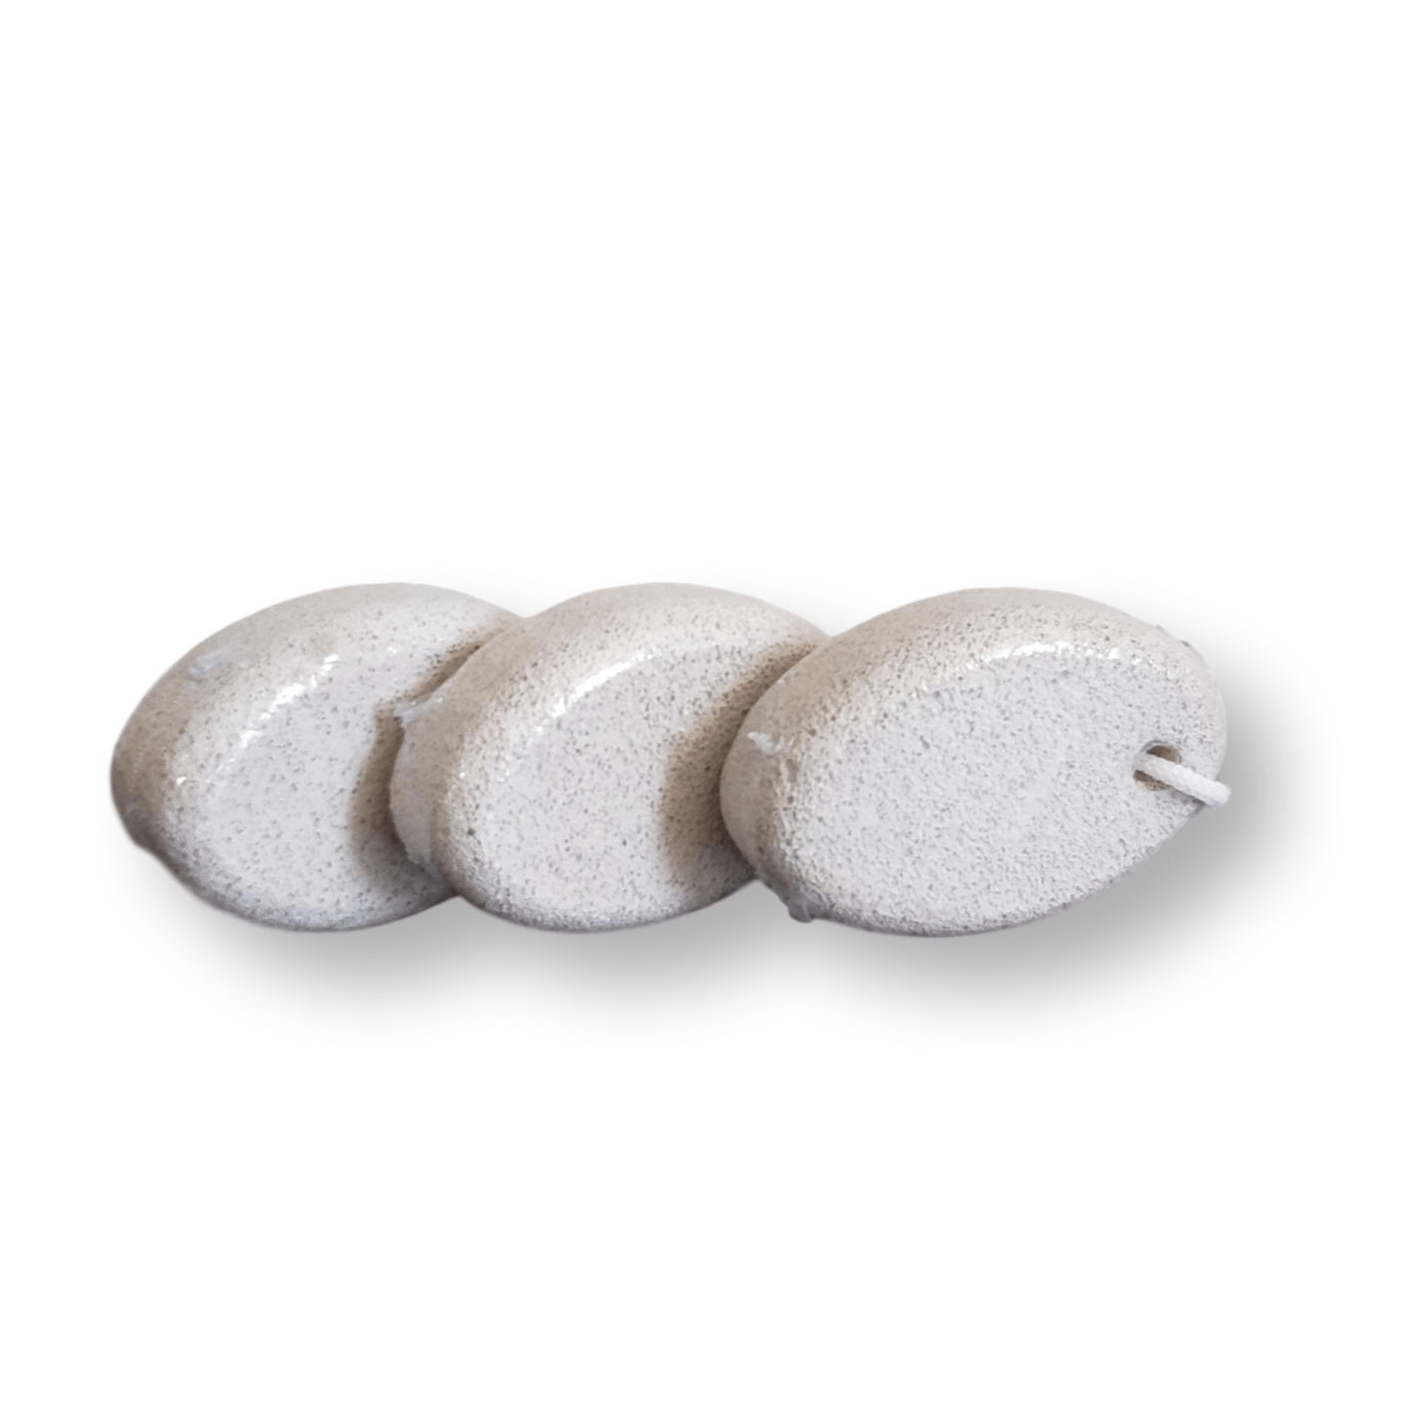 Pumice Stone for Feet